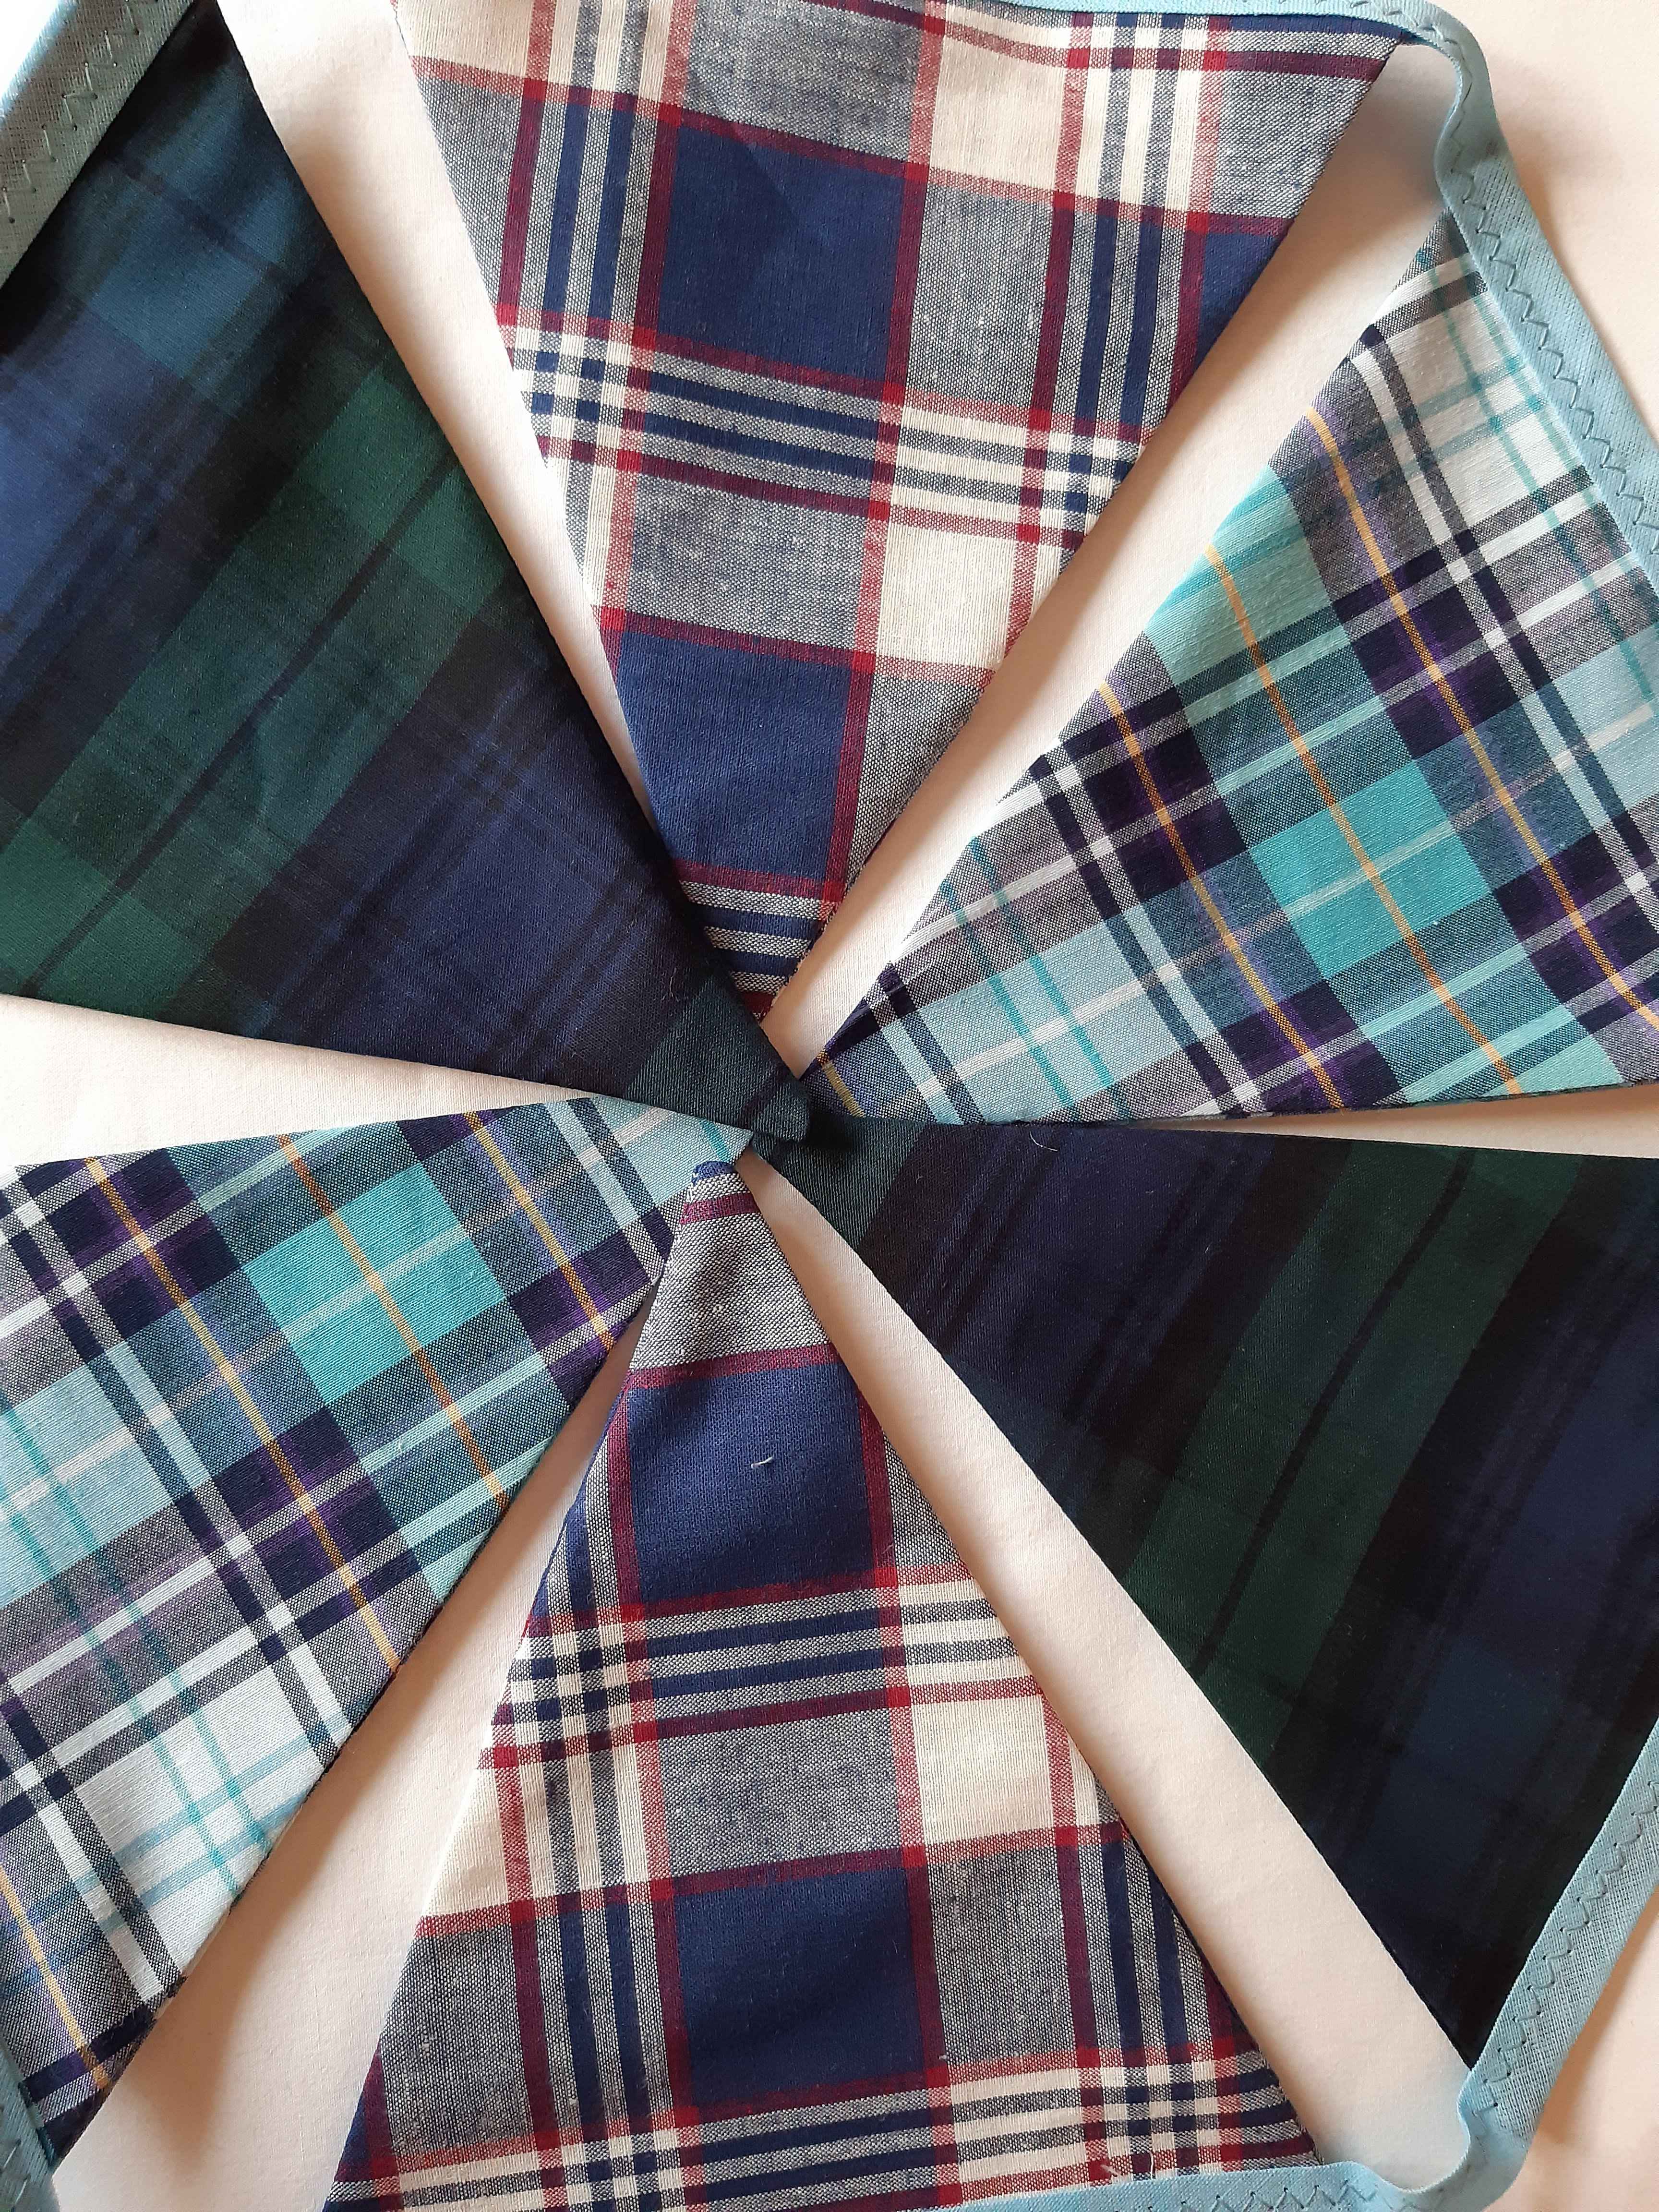 Scottish tartan bunting in greens, reds and blues